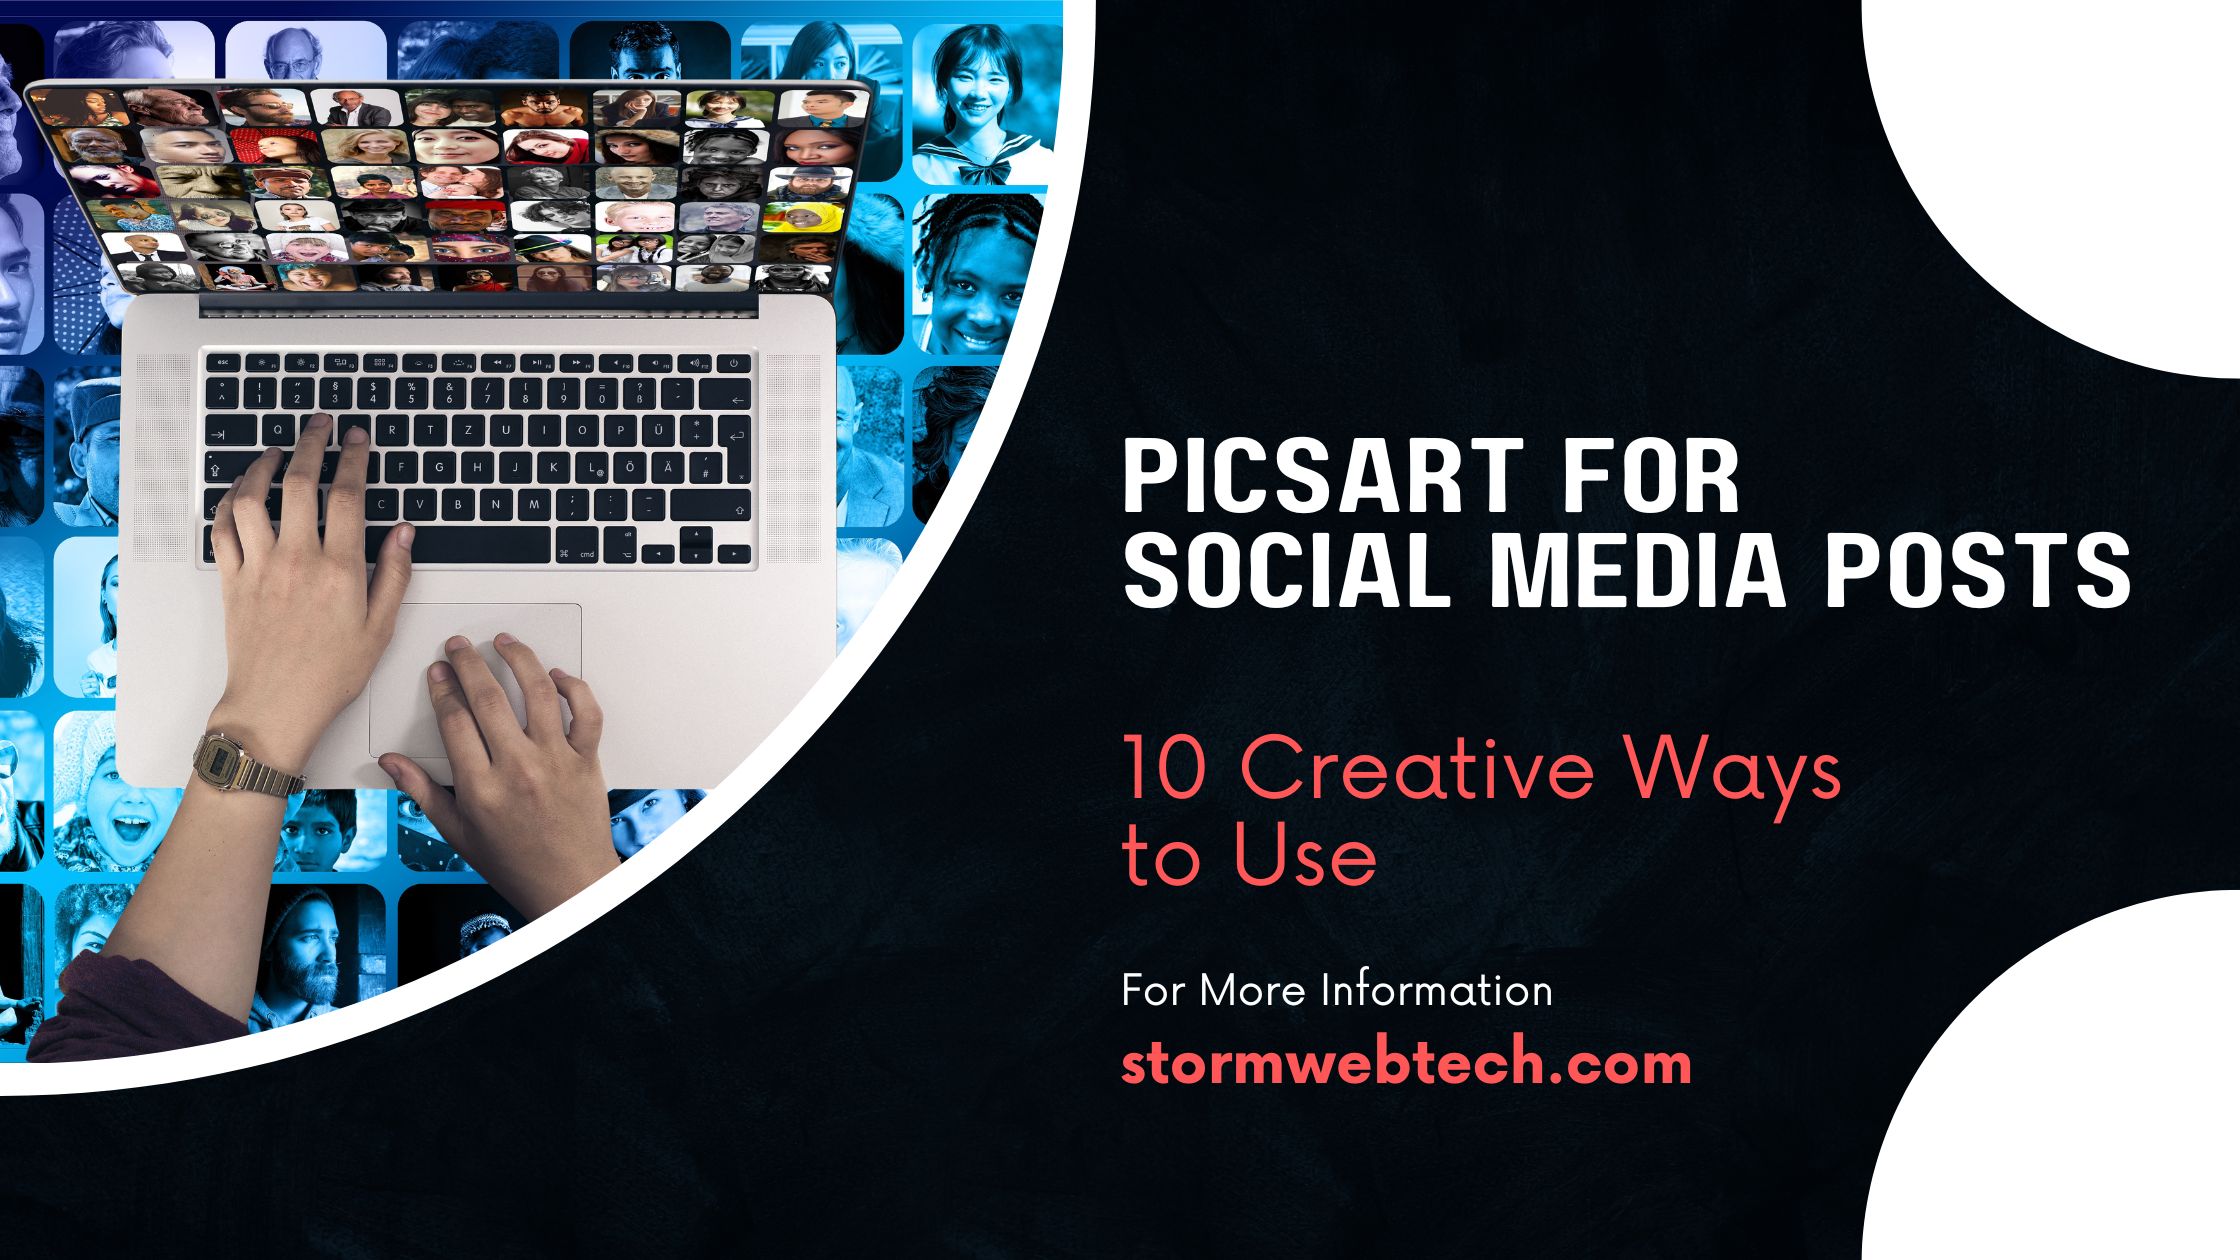 Top 10 Creative Ways to Use Picsart for Social Media Posts, Picsart is a versatile photo editing app that allows you to edit your photos with ease.